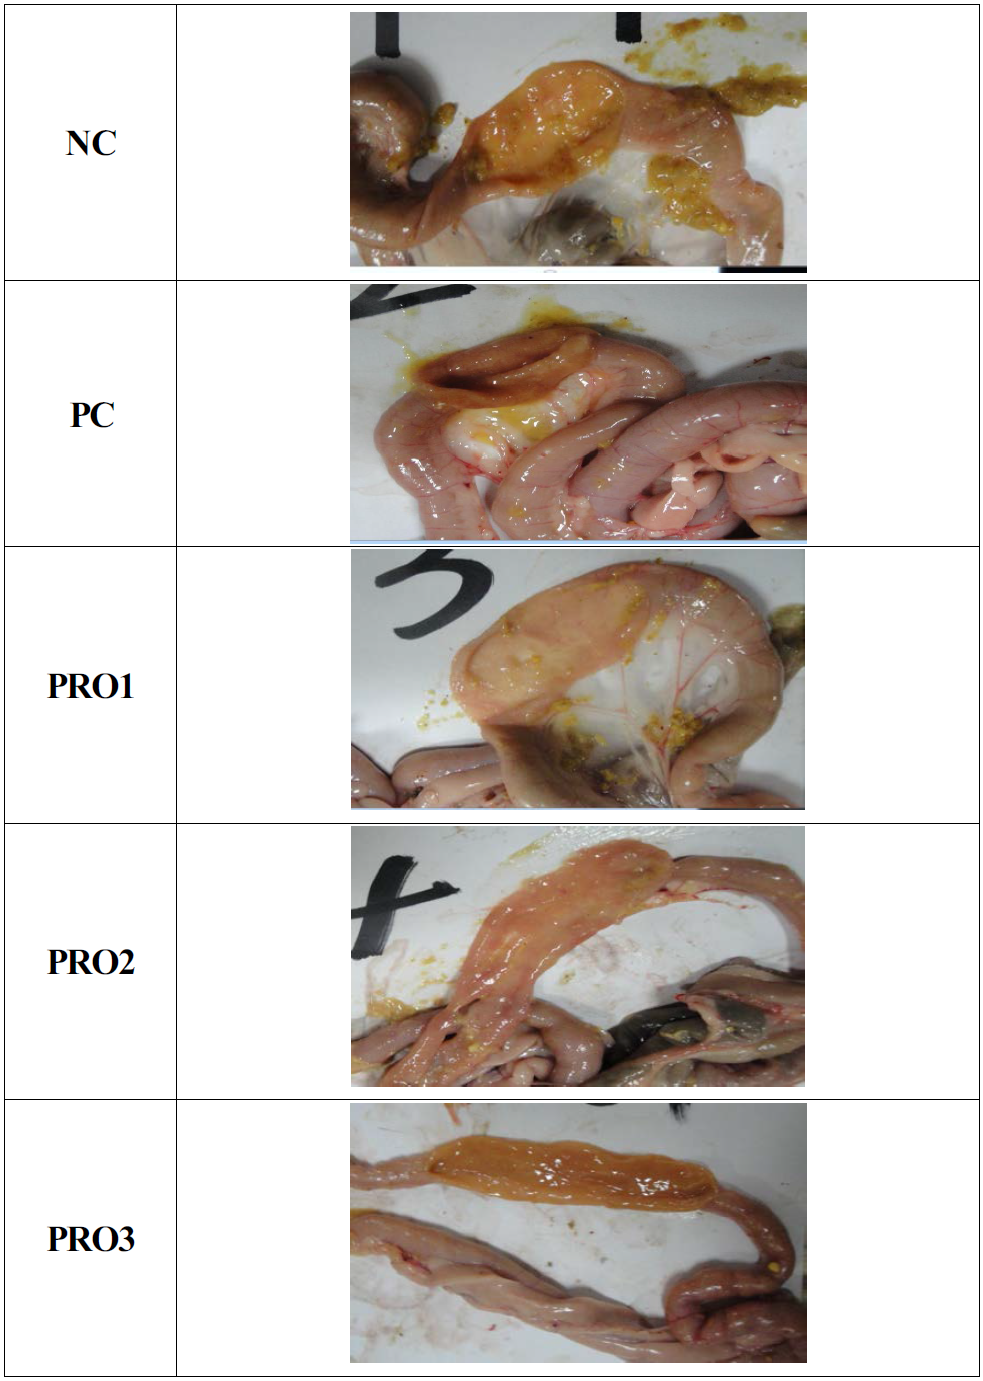 Effects of propolis supplementation on small intestinal morphology in broilers1